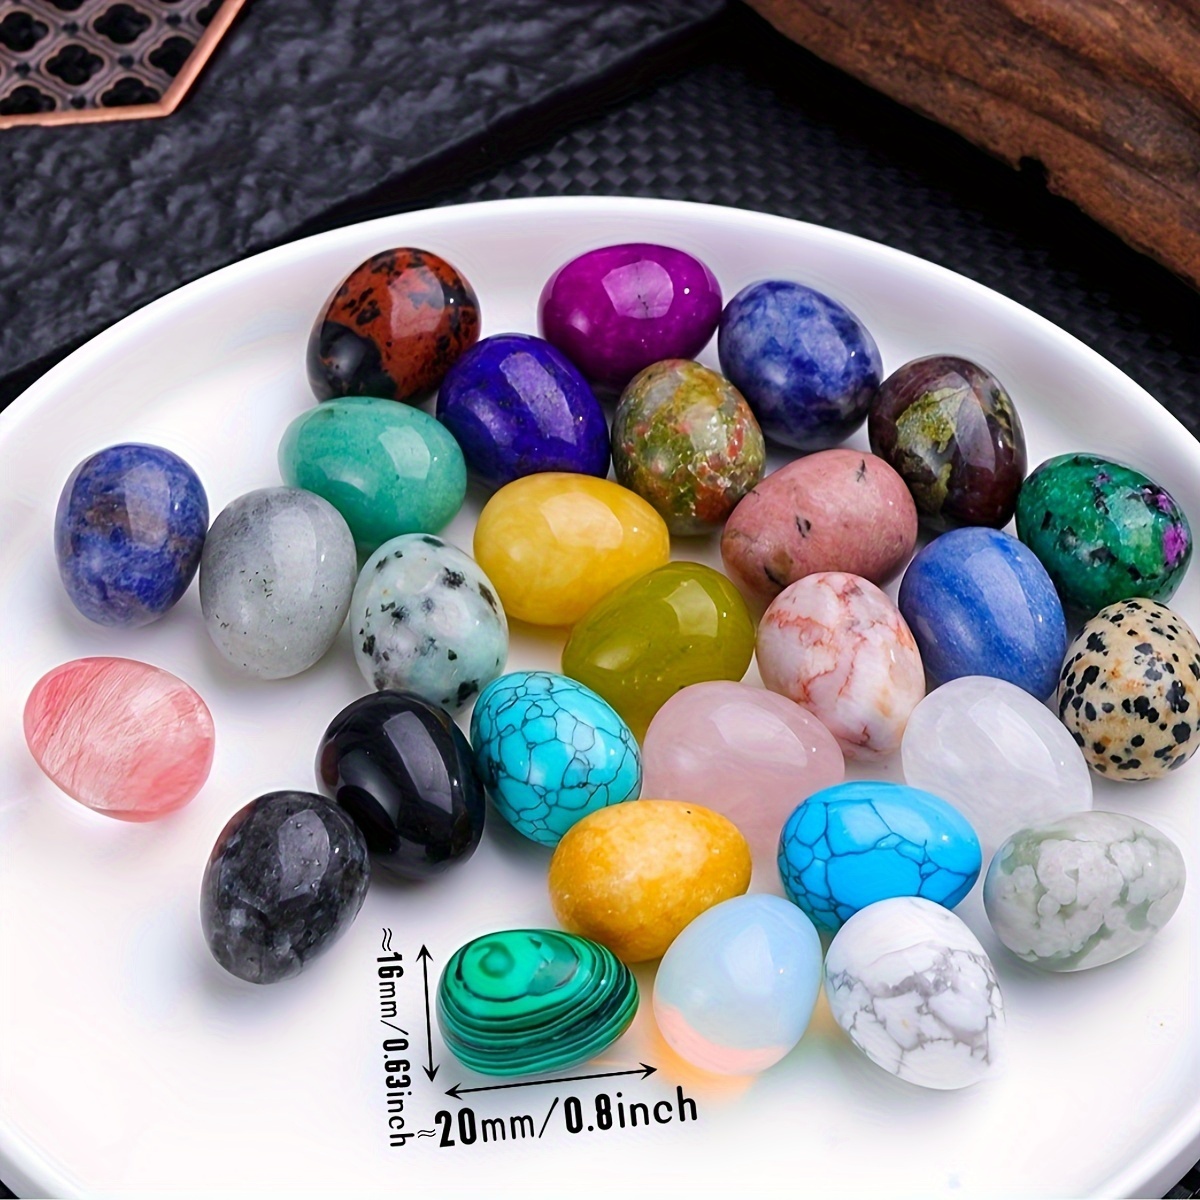 Travelwant Thinking Egg, Natural Thumb Worry Stone Hand Carved Crystals and Healing Stones for Anxiety and Stress Relief Meditation Water Drop Palm